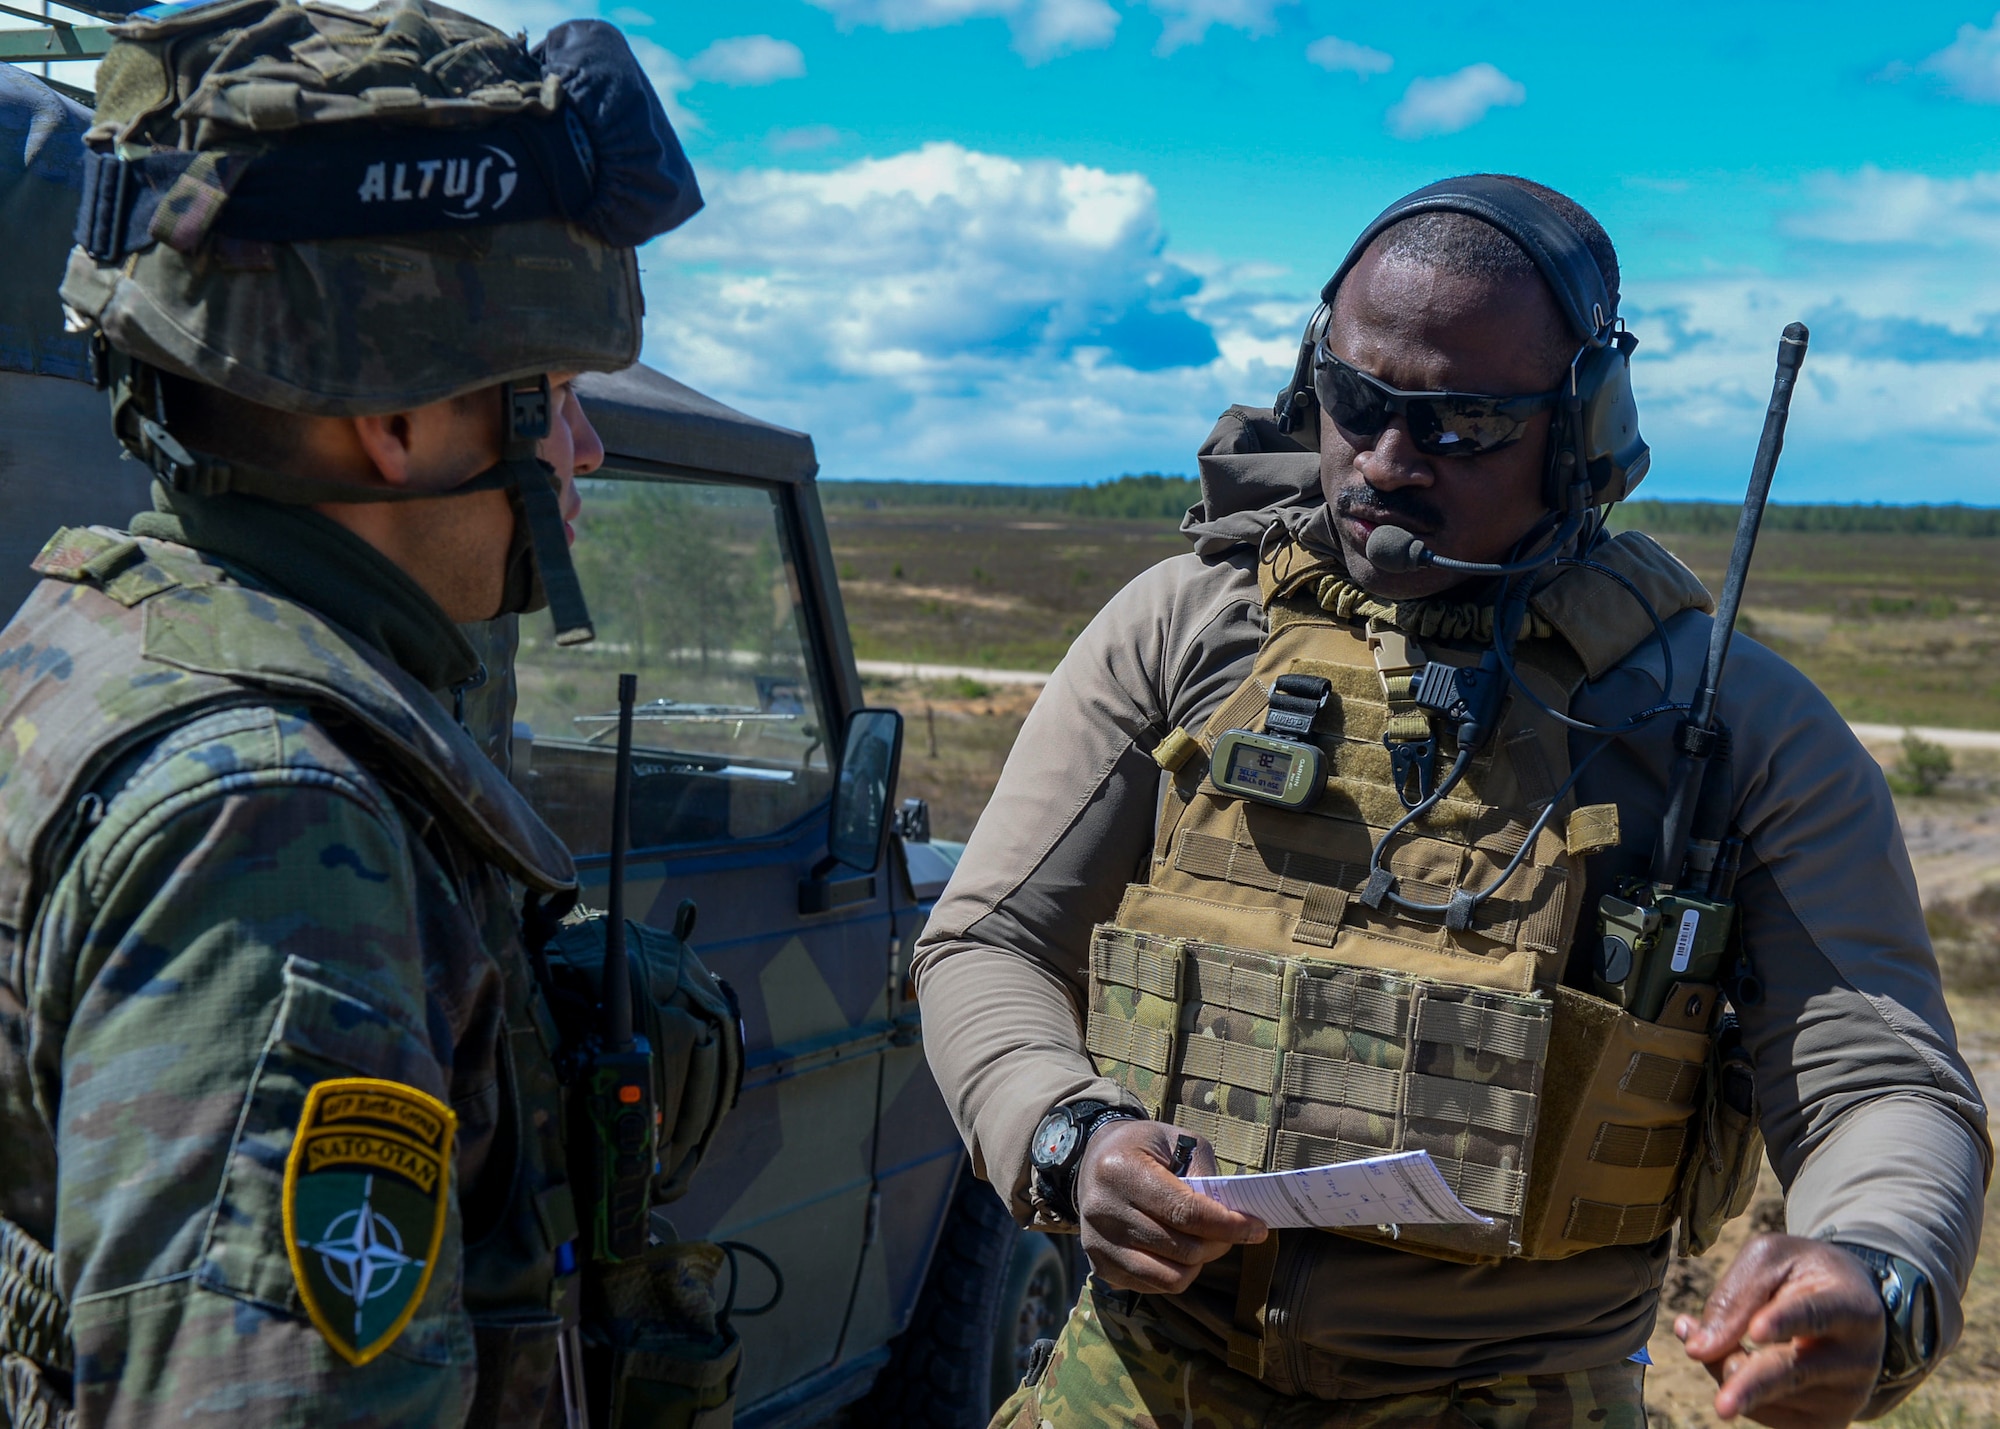 U.S. Air Force Tech. Sgt. Louis Awua, 122nd Air Support Operations Squadron Joint Terminal Attack Controller instructor, explains procedures for calling in close air support to OF-1 Ricardo Cobos, Spanish Forces JTAC, during Saber Strike 18 in Adazi, Latvia, June 5, 2018. During Saber Strike 18, approximately 18,000 members from 19 countries worked together to build on interoperability to improve air, land, and sea capabilities. (U.S. Air Force photo by Staff Sgt. Jimmie D. Pike)